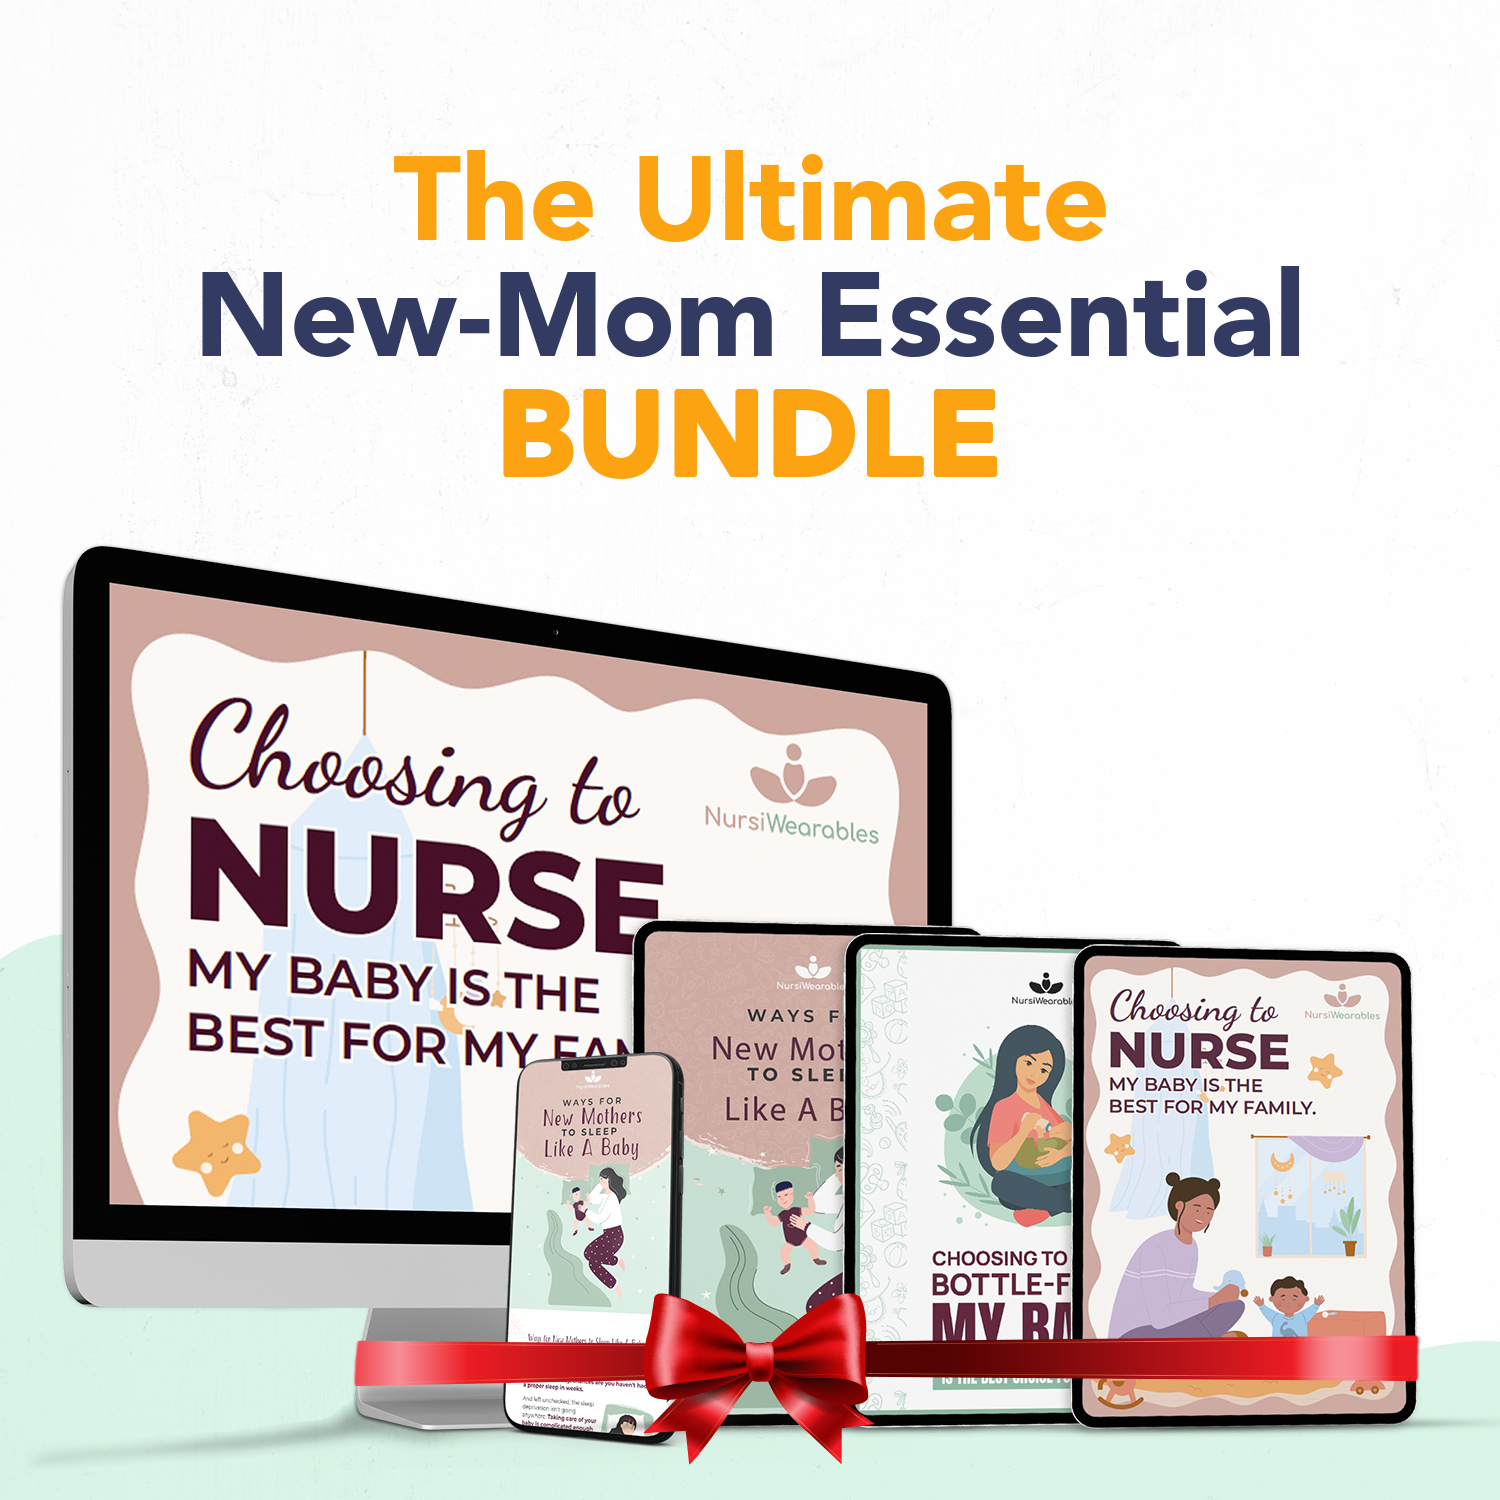 The Ultimate New-Mom Essential Bundle